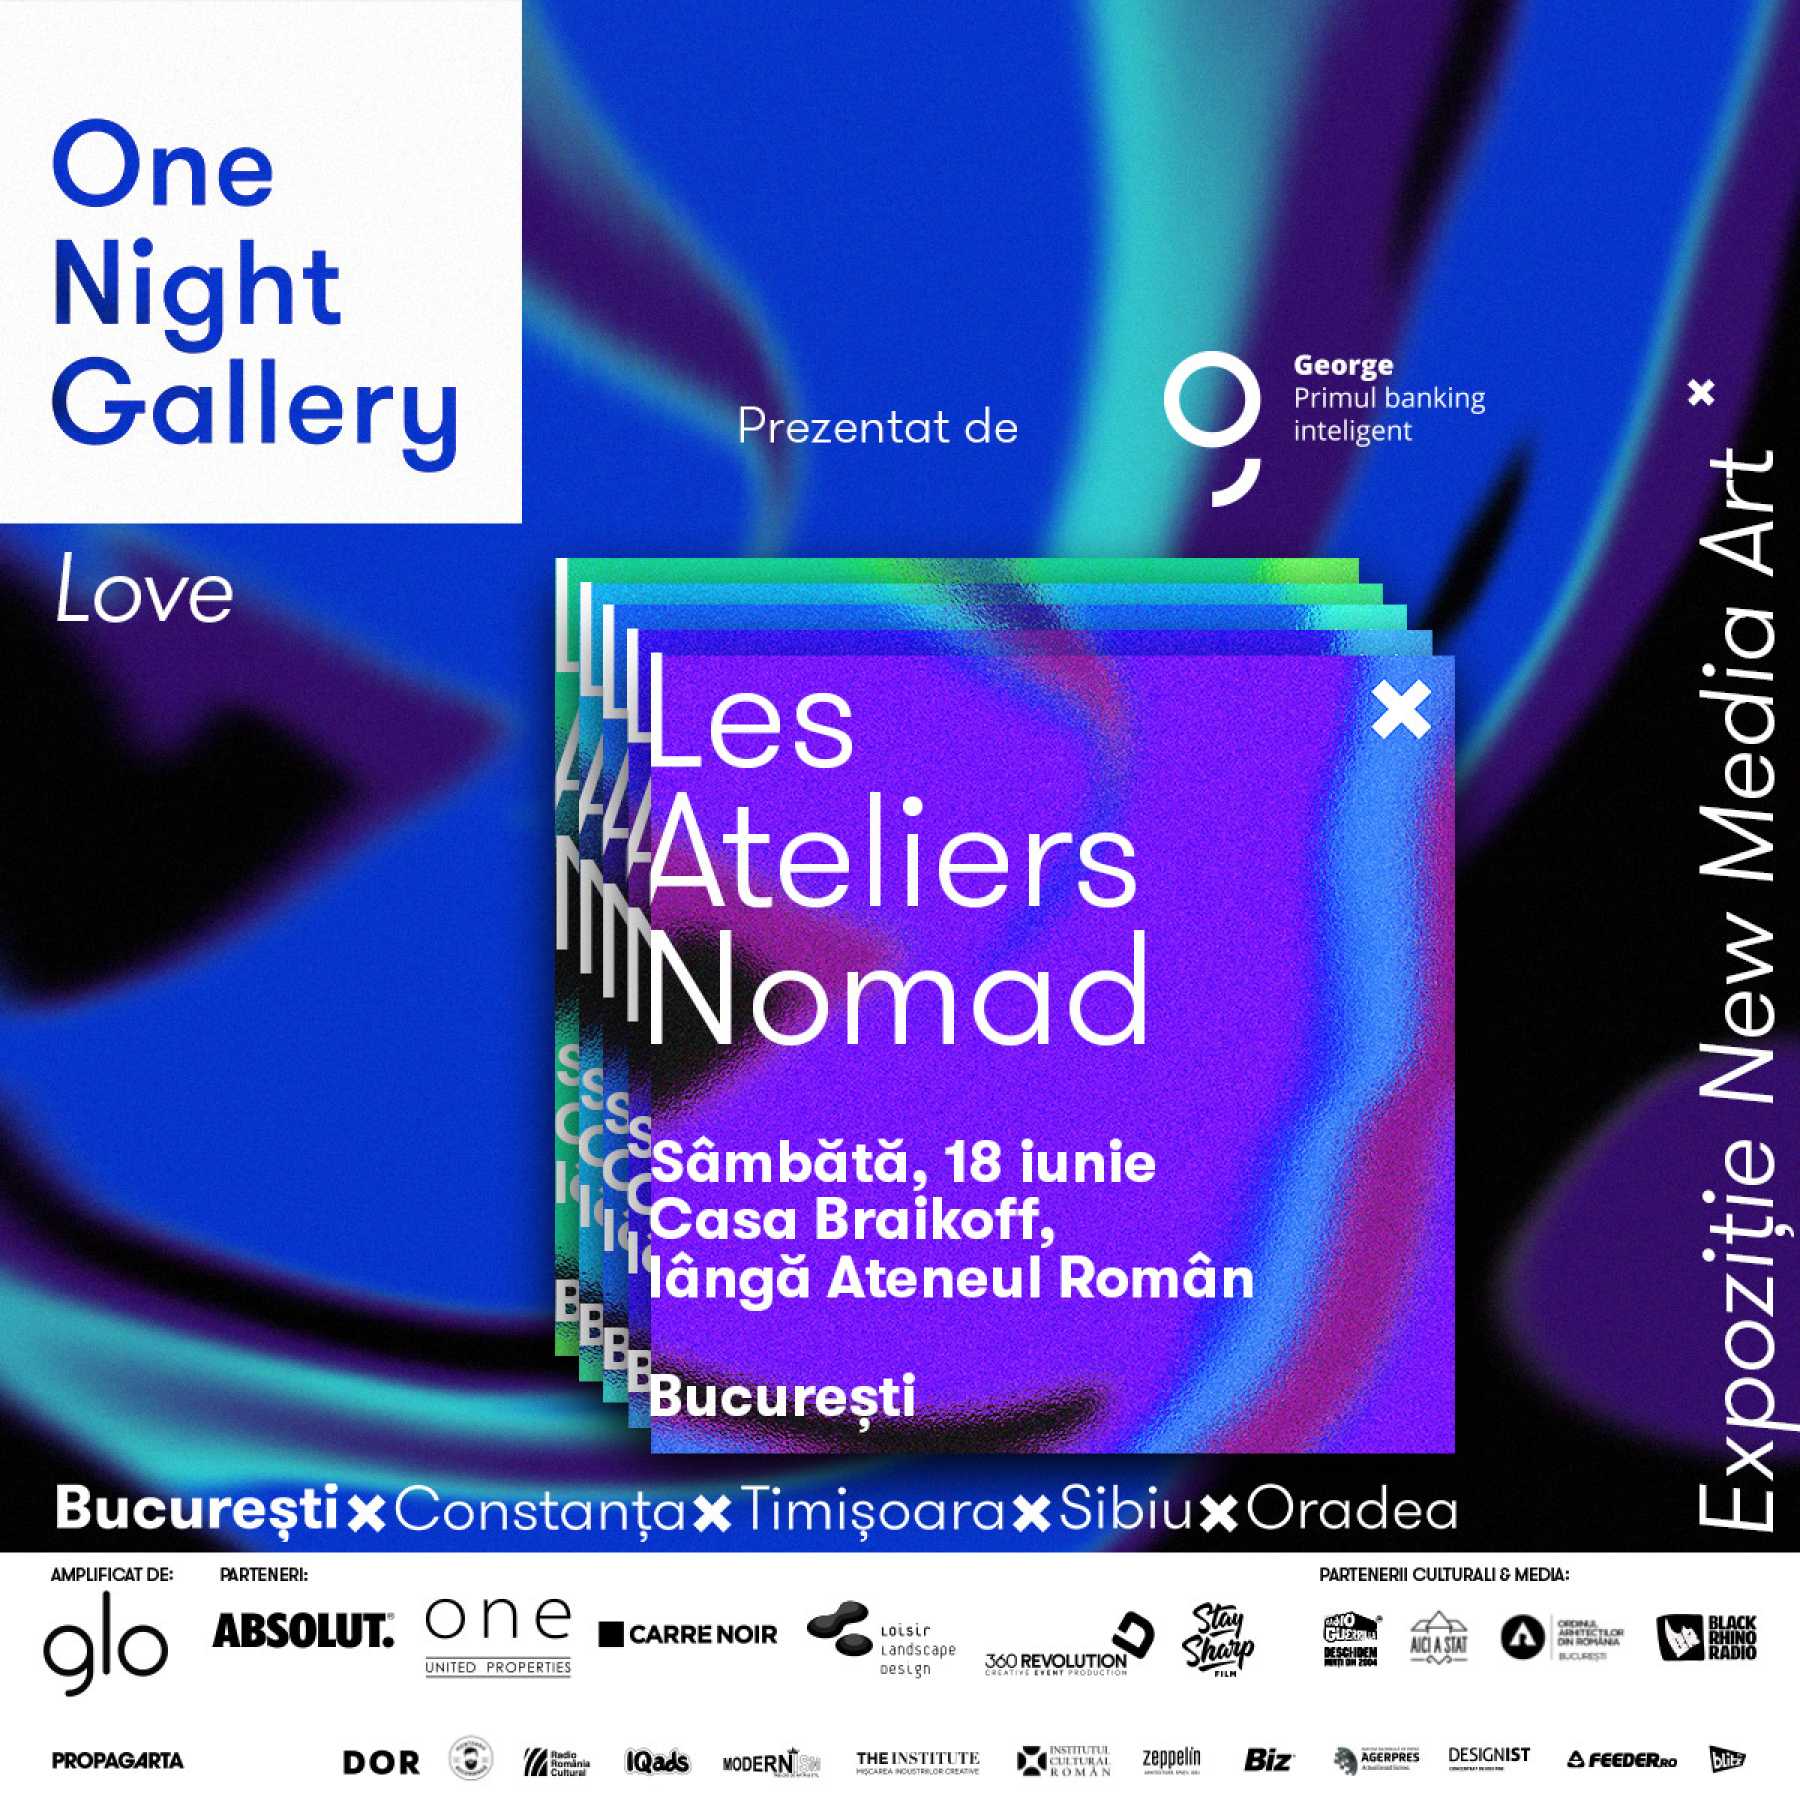 One United Properties supports One Night Gallery @ One Athénée (Braikoff House) in Bucharest